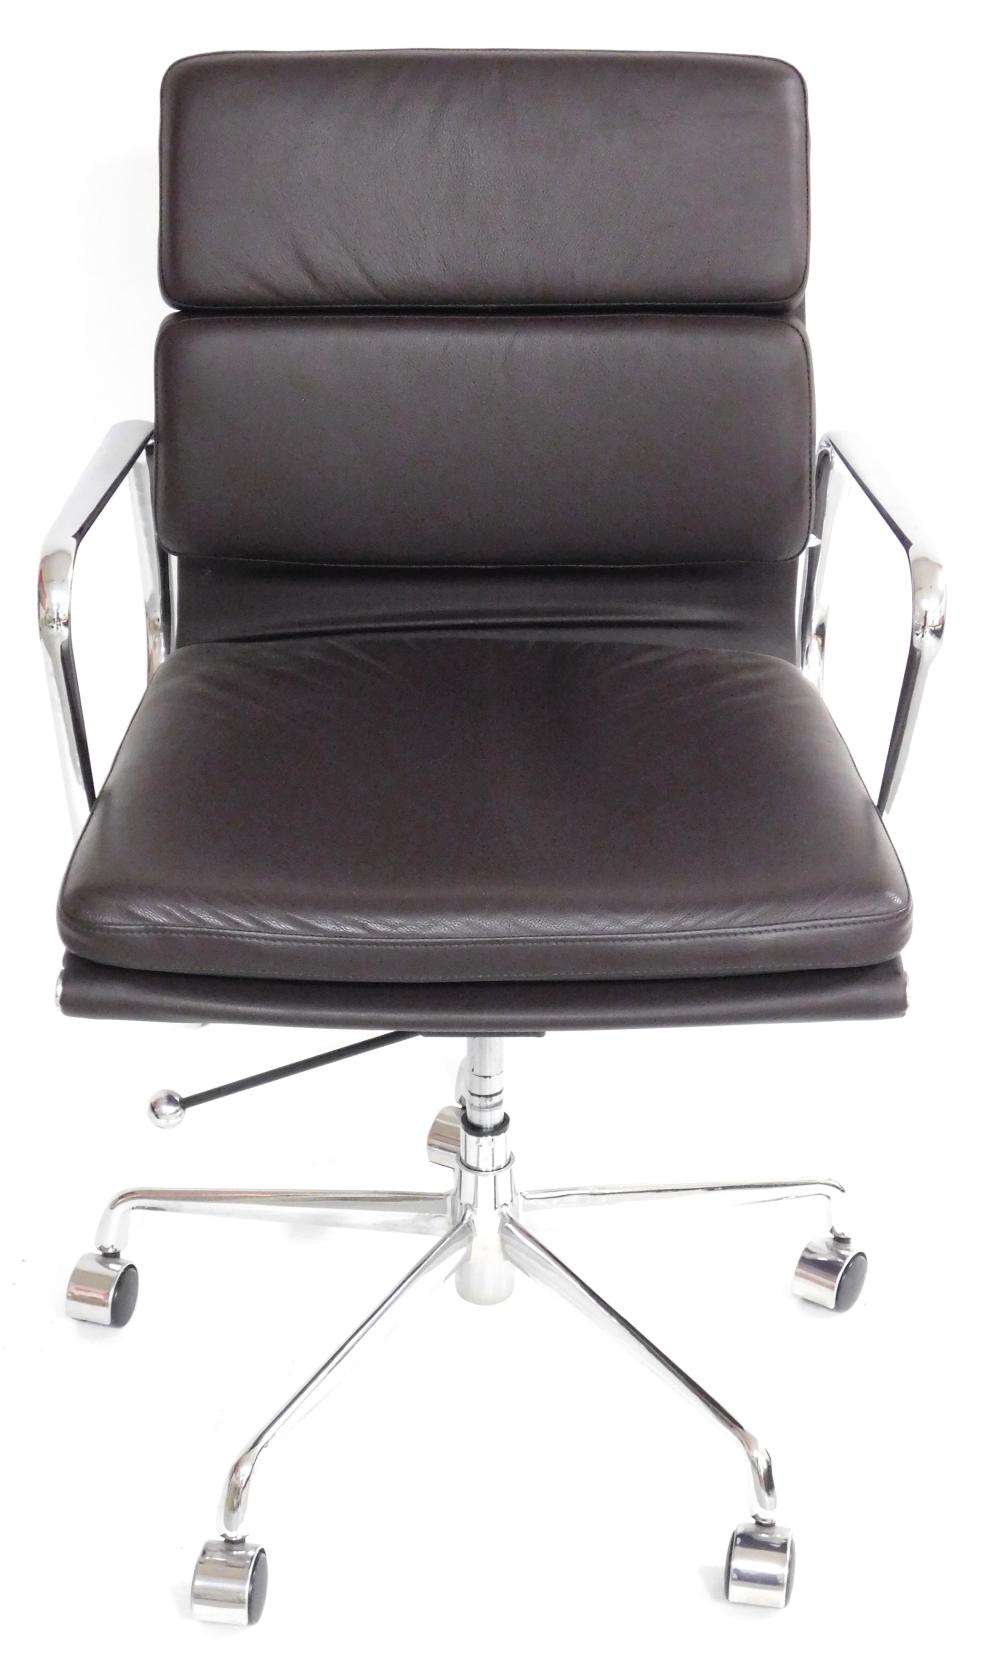 EAMES DESIGN OFFICE CHAIR WITH 31d63d